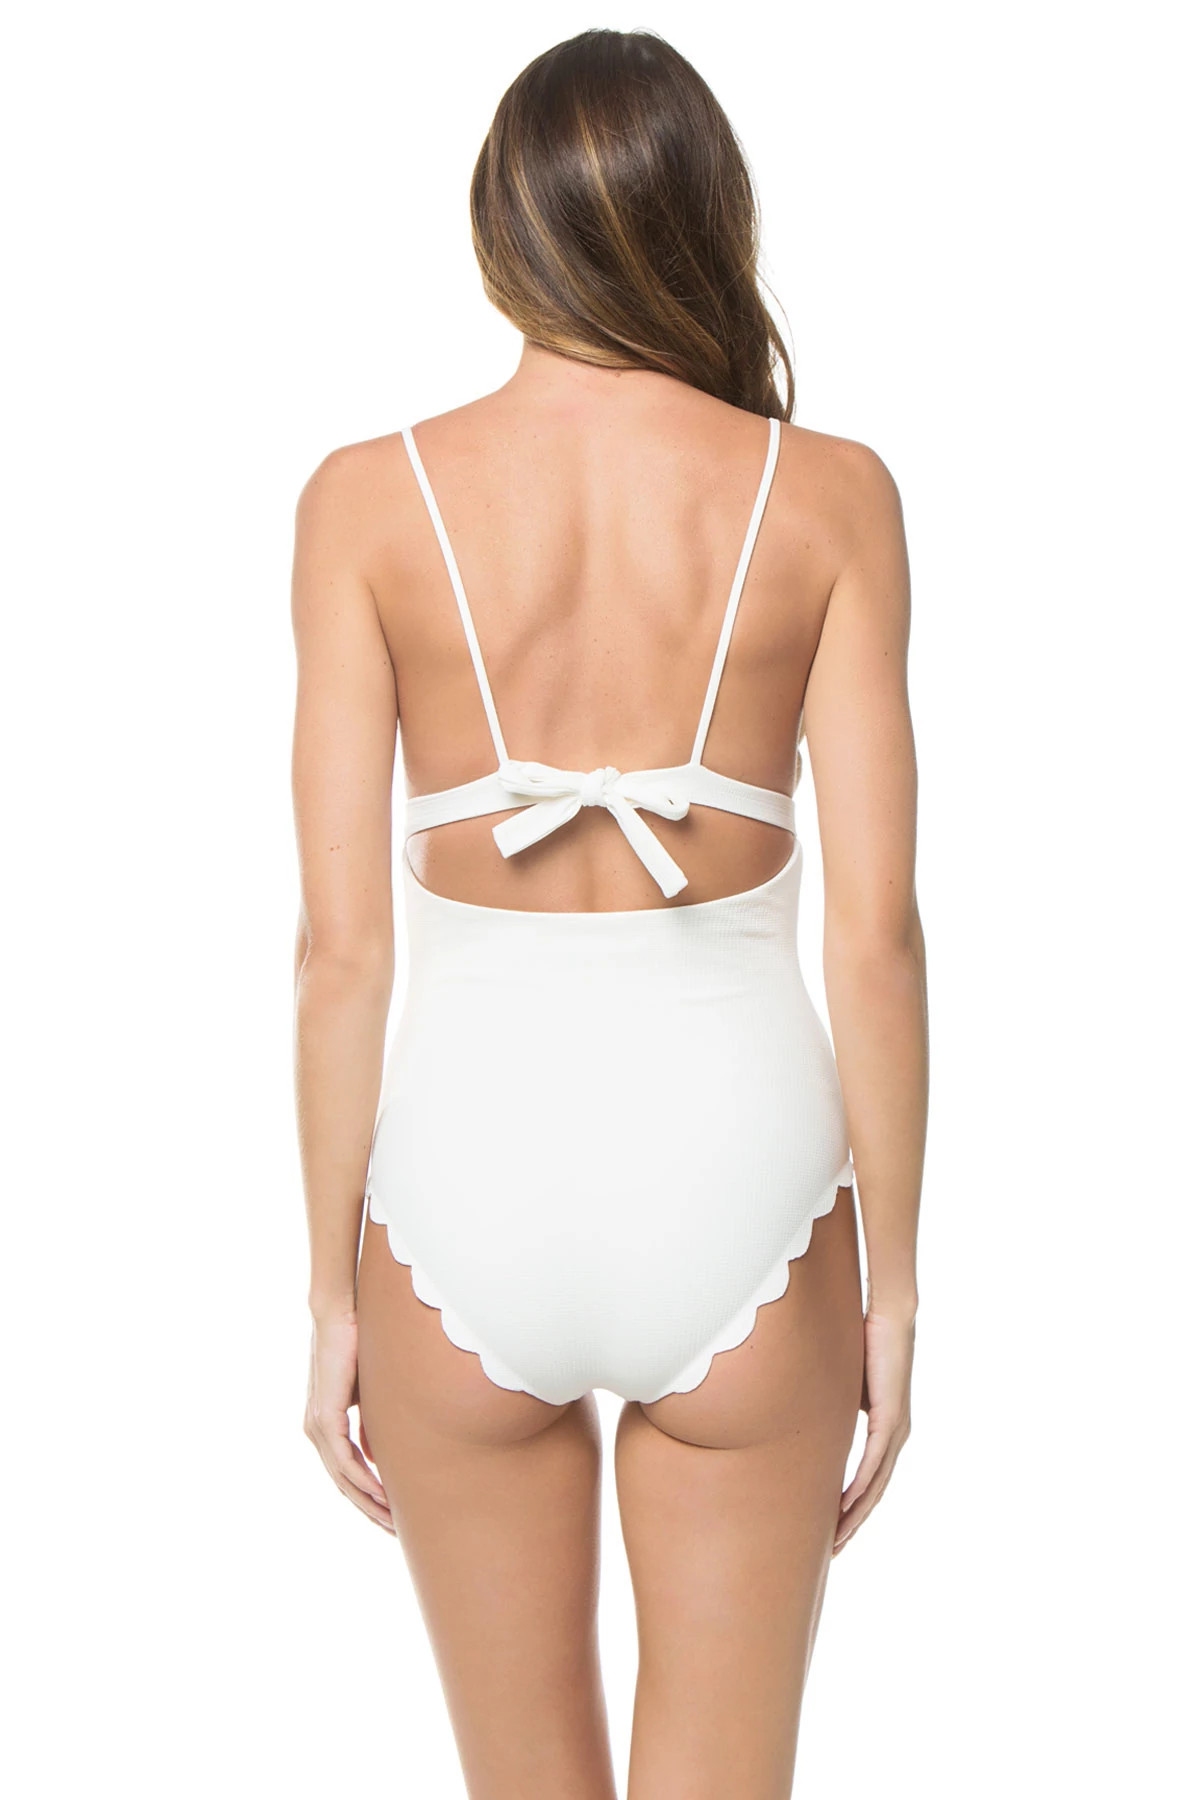 COCONUT Santa Clara Scallop Over The Shoulder One Piece Swimsuit image number 2